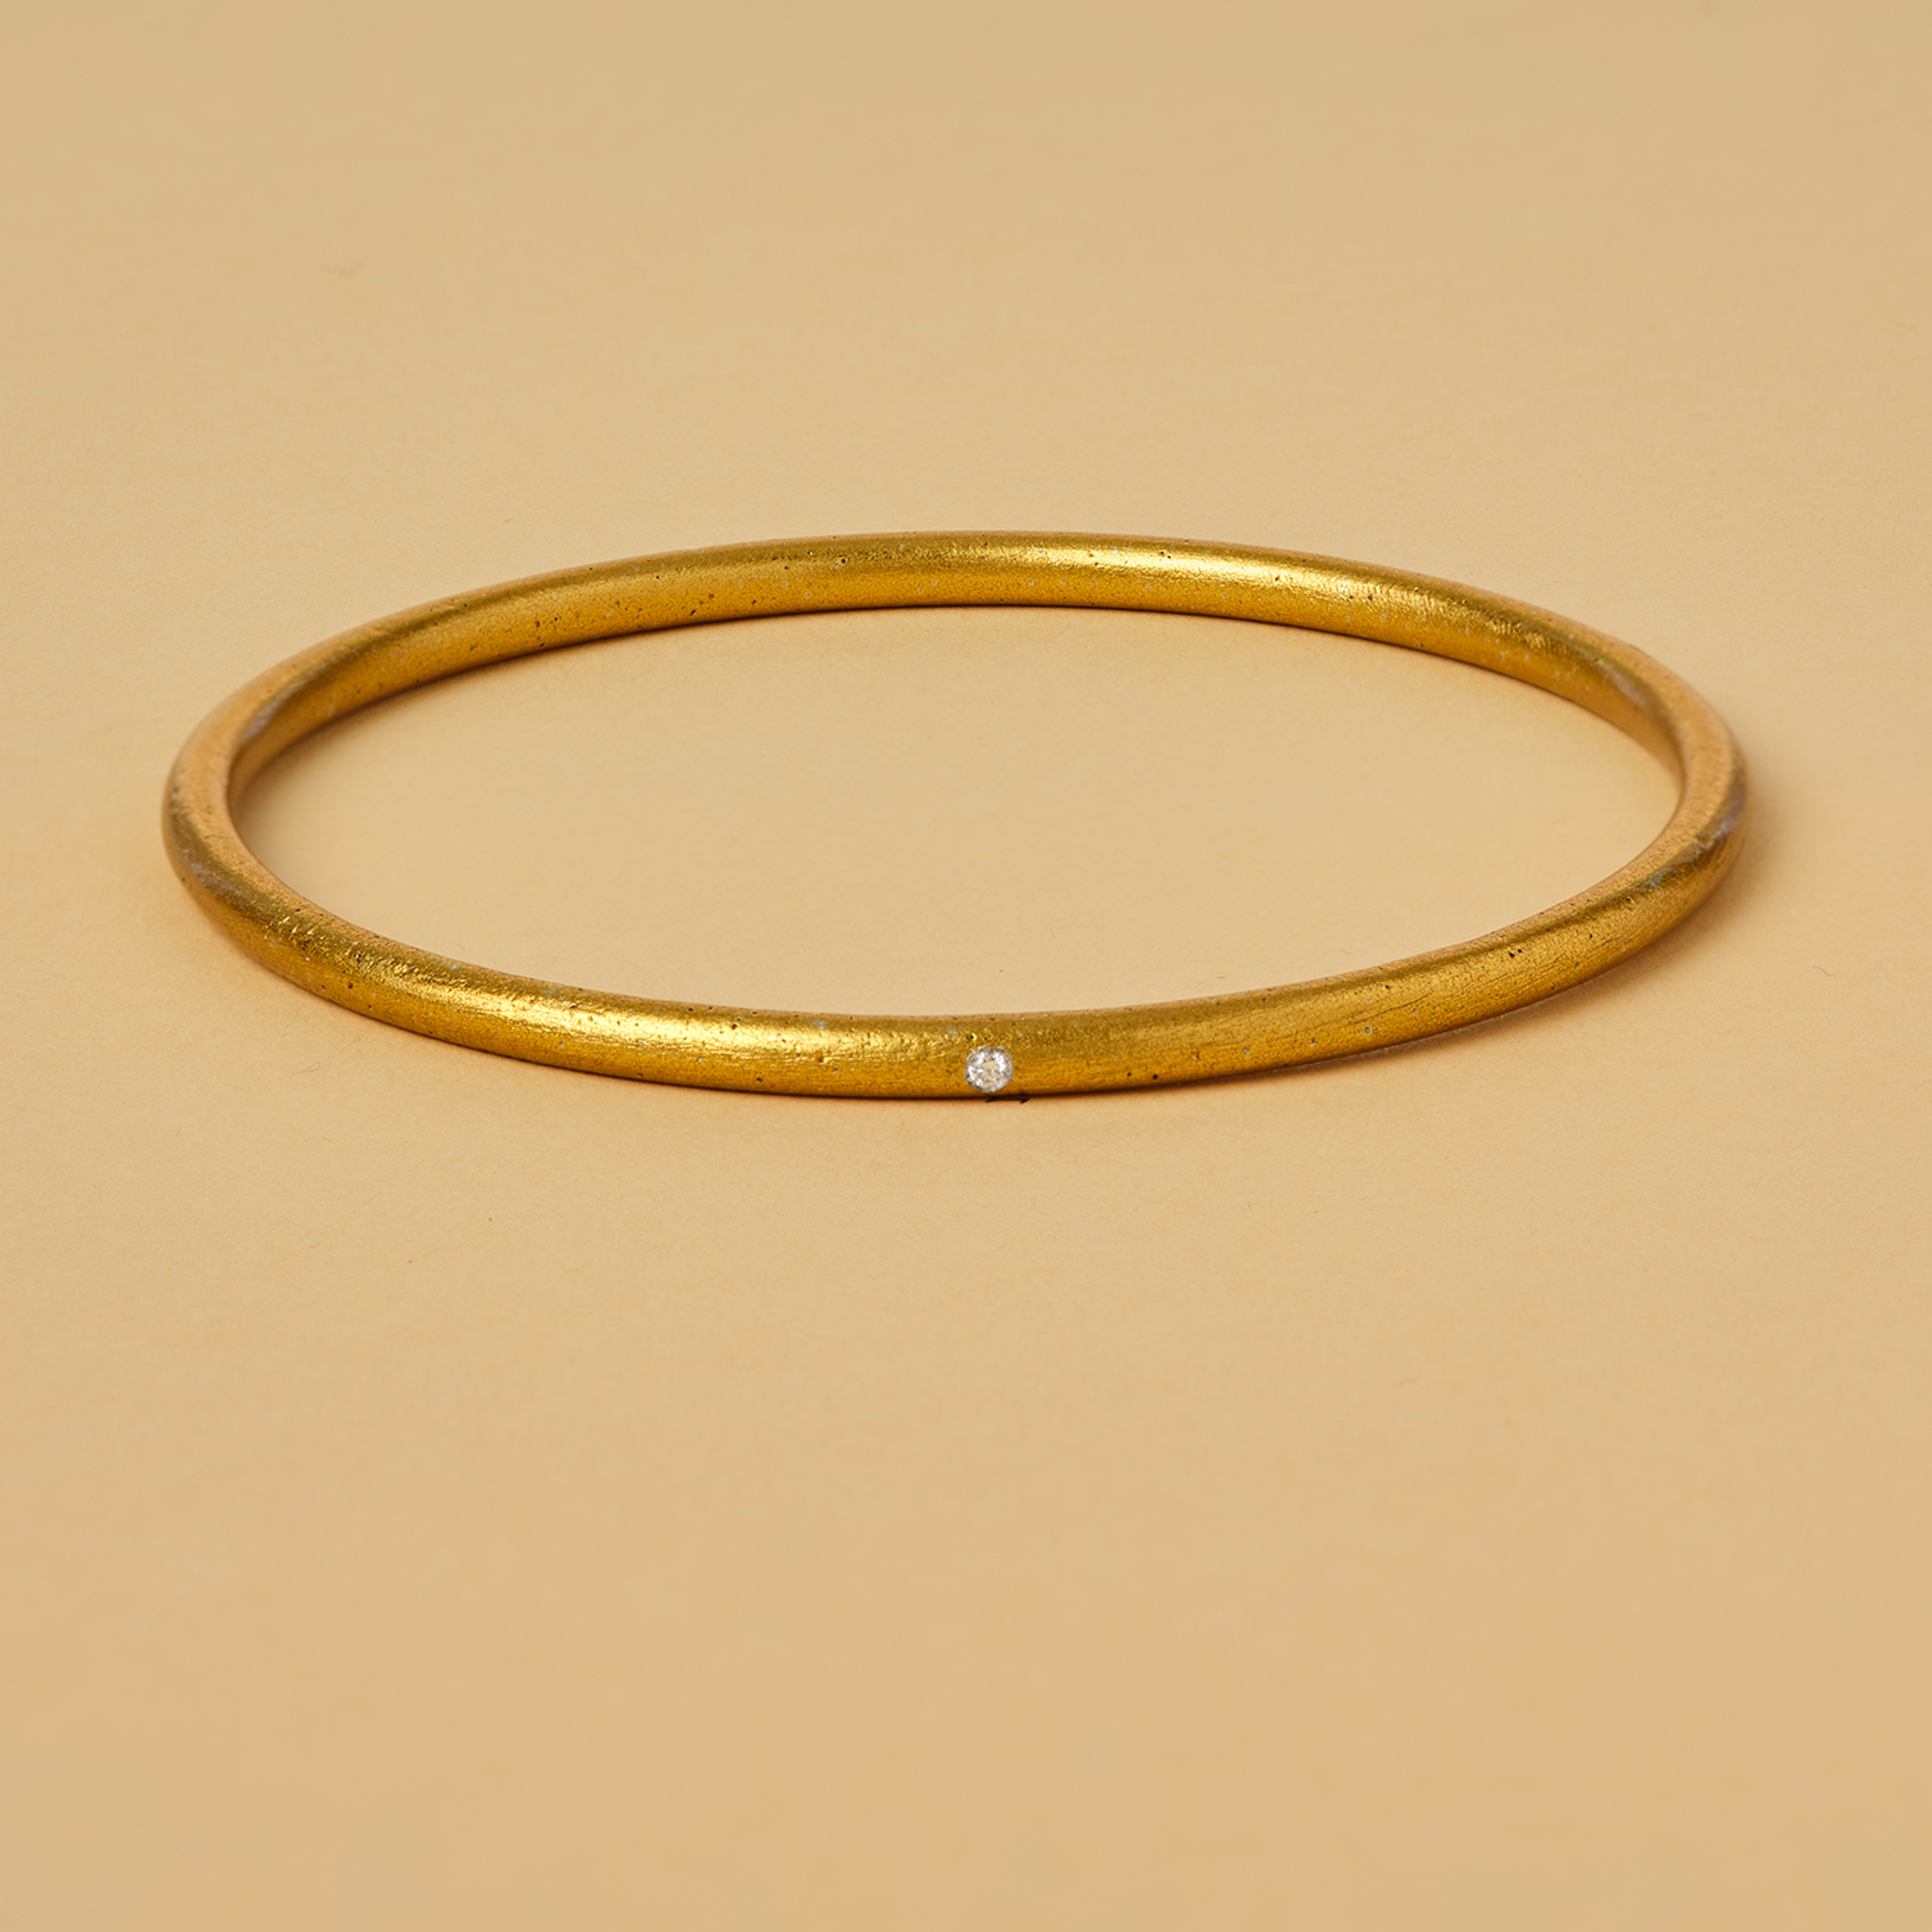 ARTICLE22 Love Is the Bomb Diamond Bangle - Sustainable & Ethical Laotian Jewelry